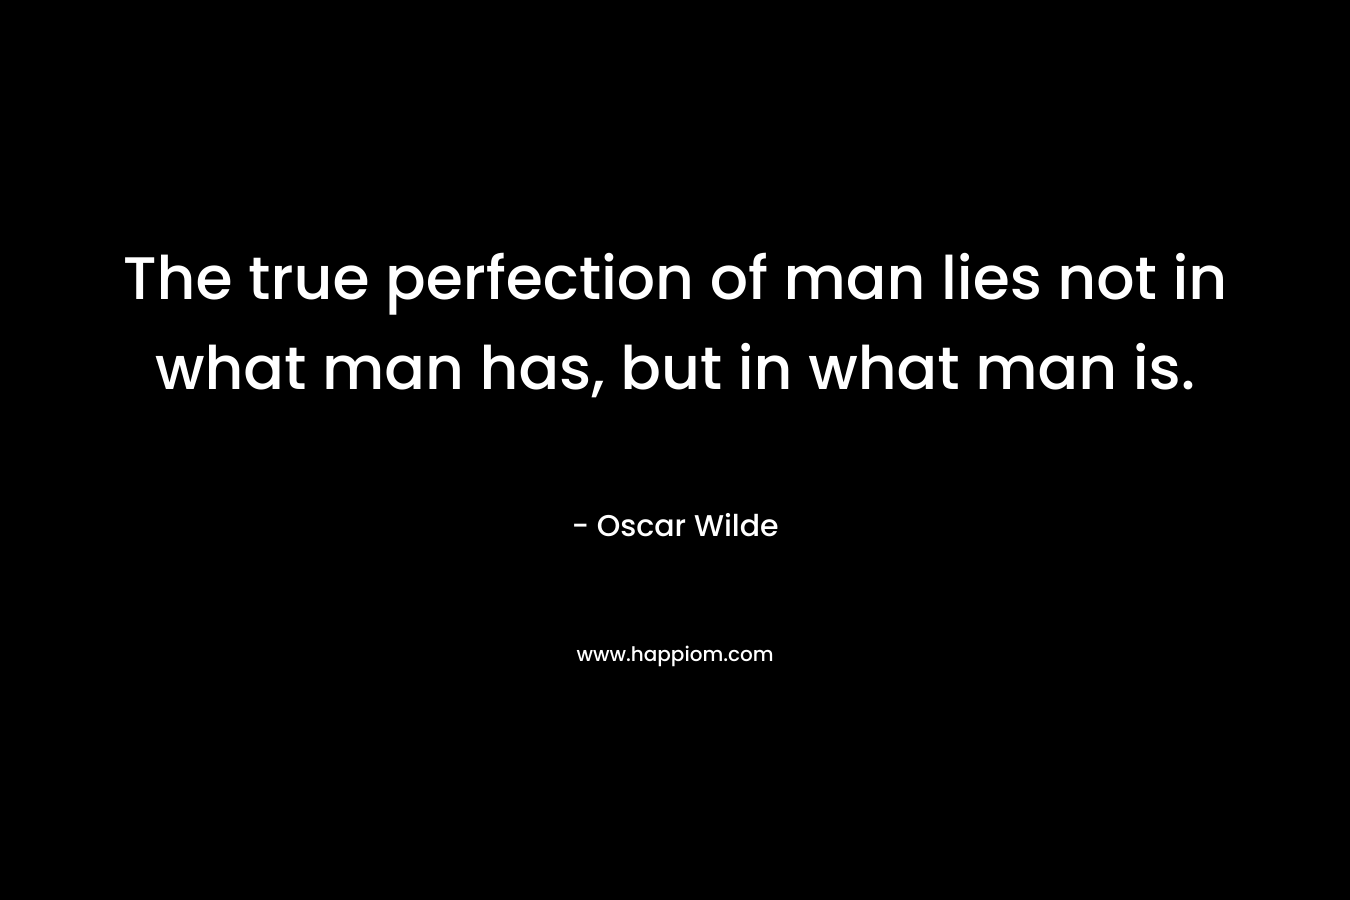 The true perfection of man lies not in what man has, but in what man is. – Oscar Wilde